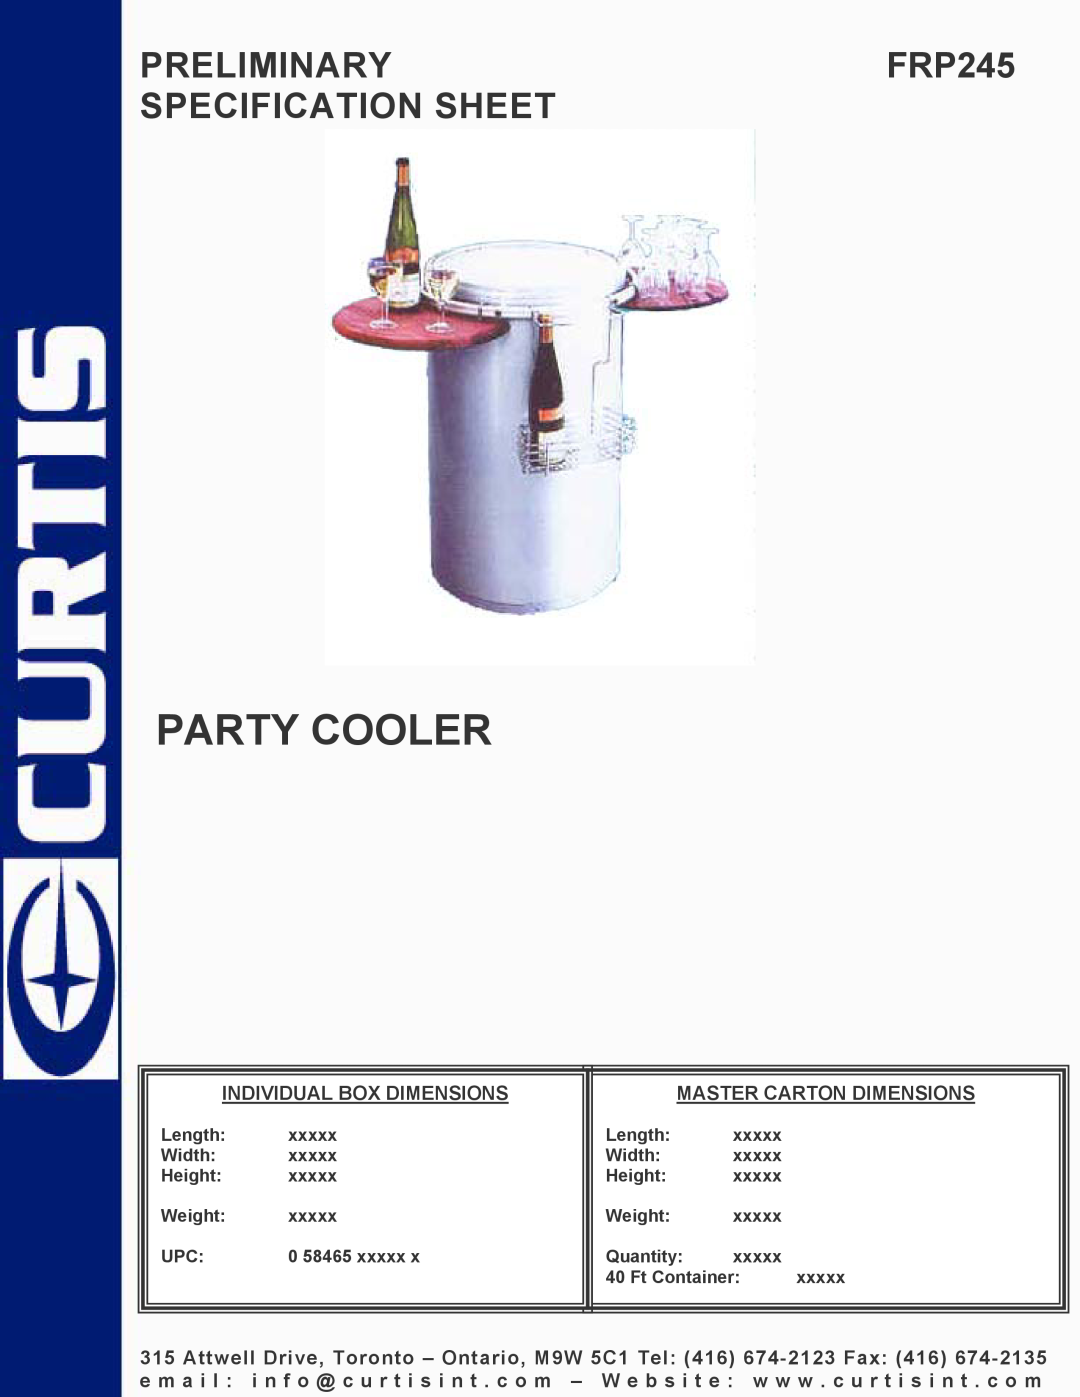 Curtis specifications Party Cooler, PRELIMINARYFRP245 SPECIFICATION SHEET 